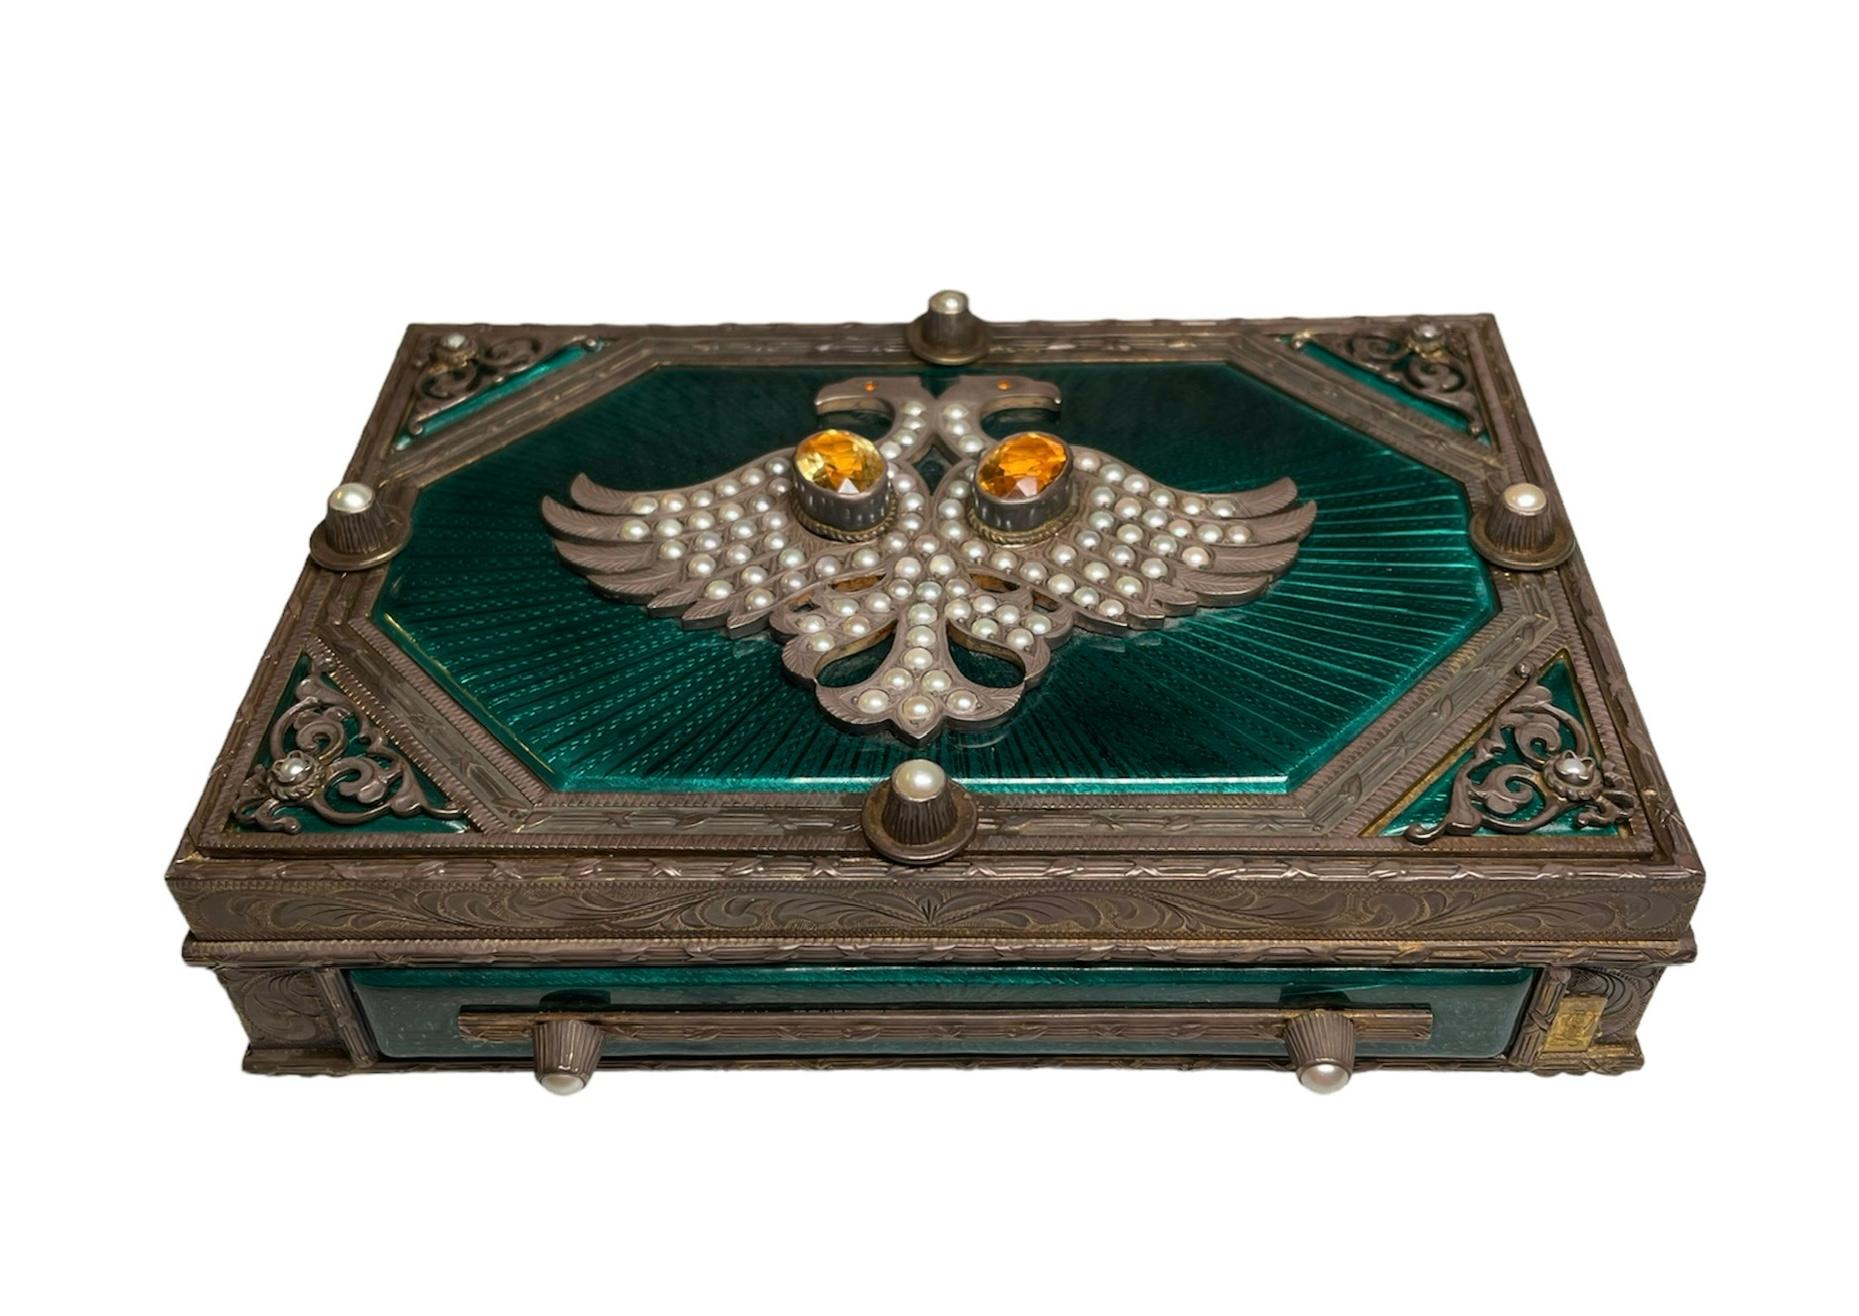 This is Faberge style rectangular patinated 925 silver metal decorative box/cigarette case. It depicts a heavy hinged box very well ornamented. The top of the lid is covered by an octagonal shaped emerald green translucent guilloche enamel in the